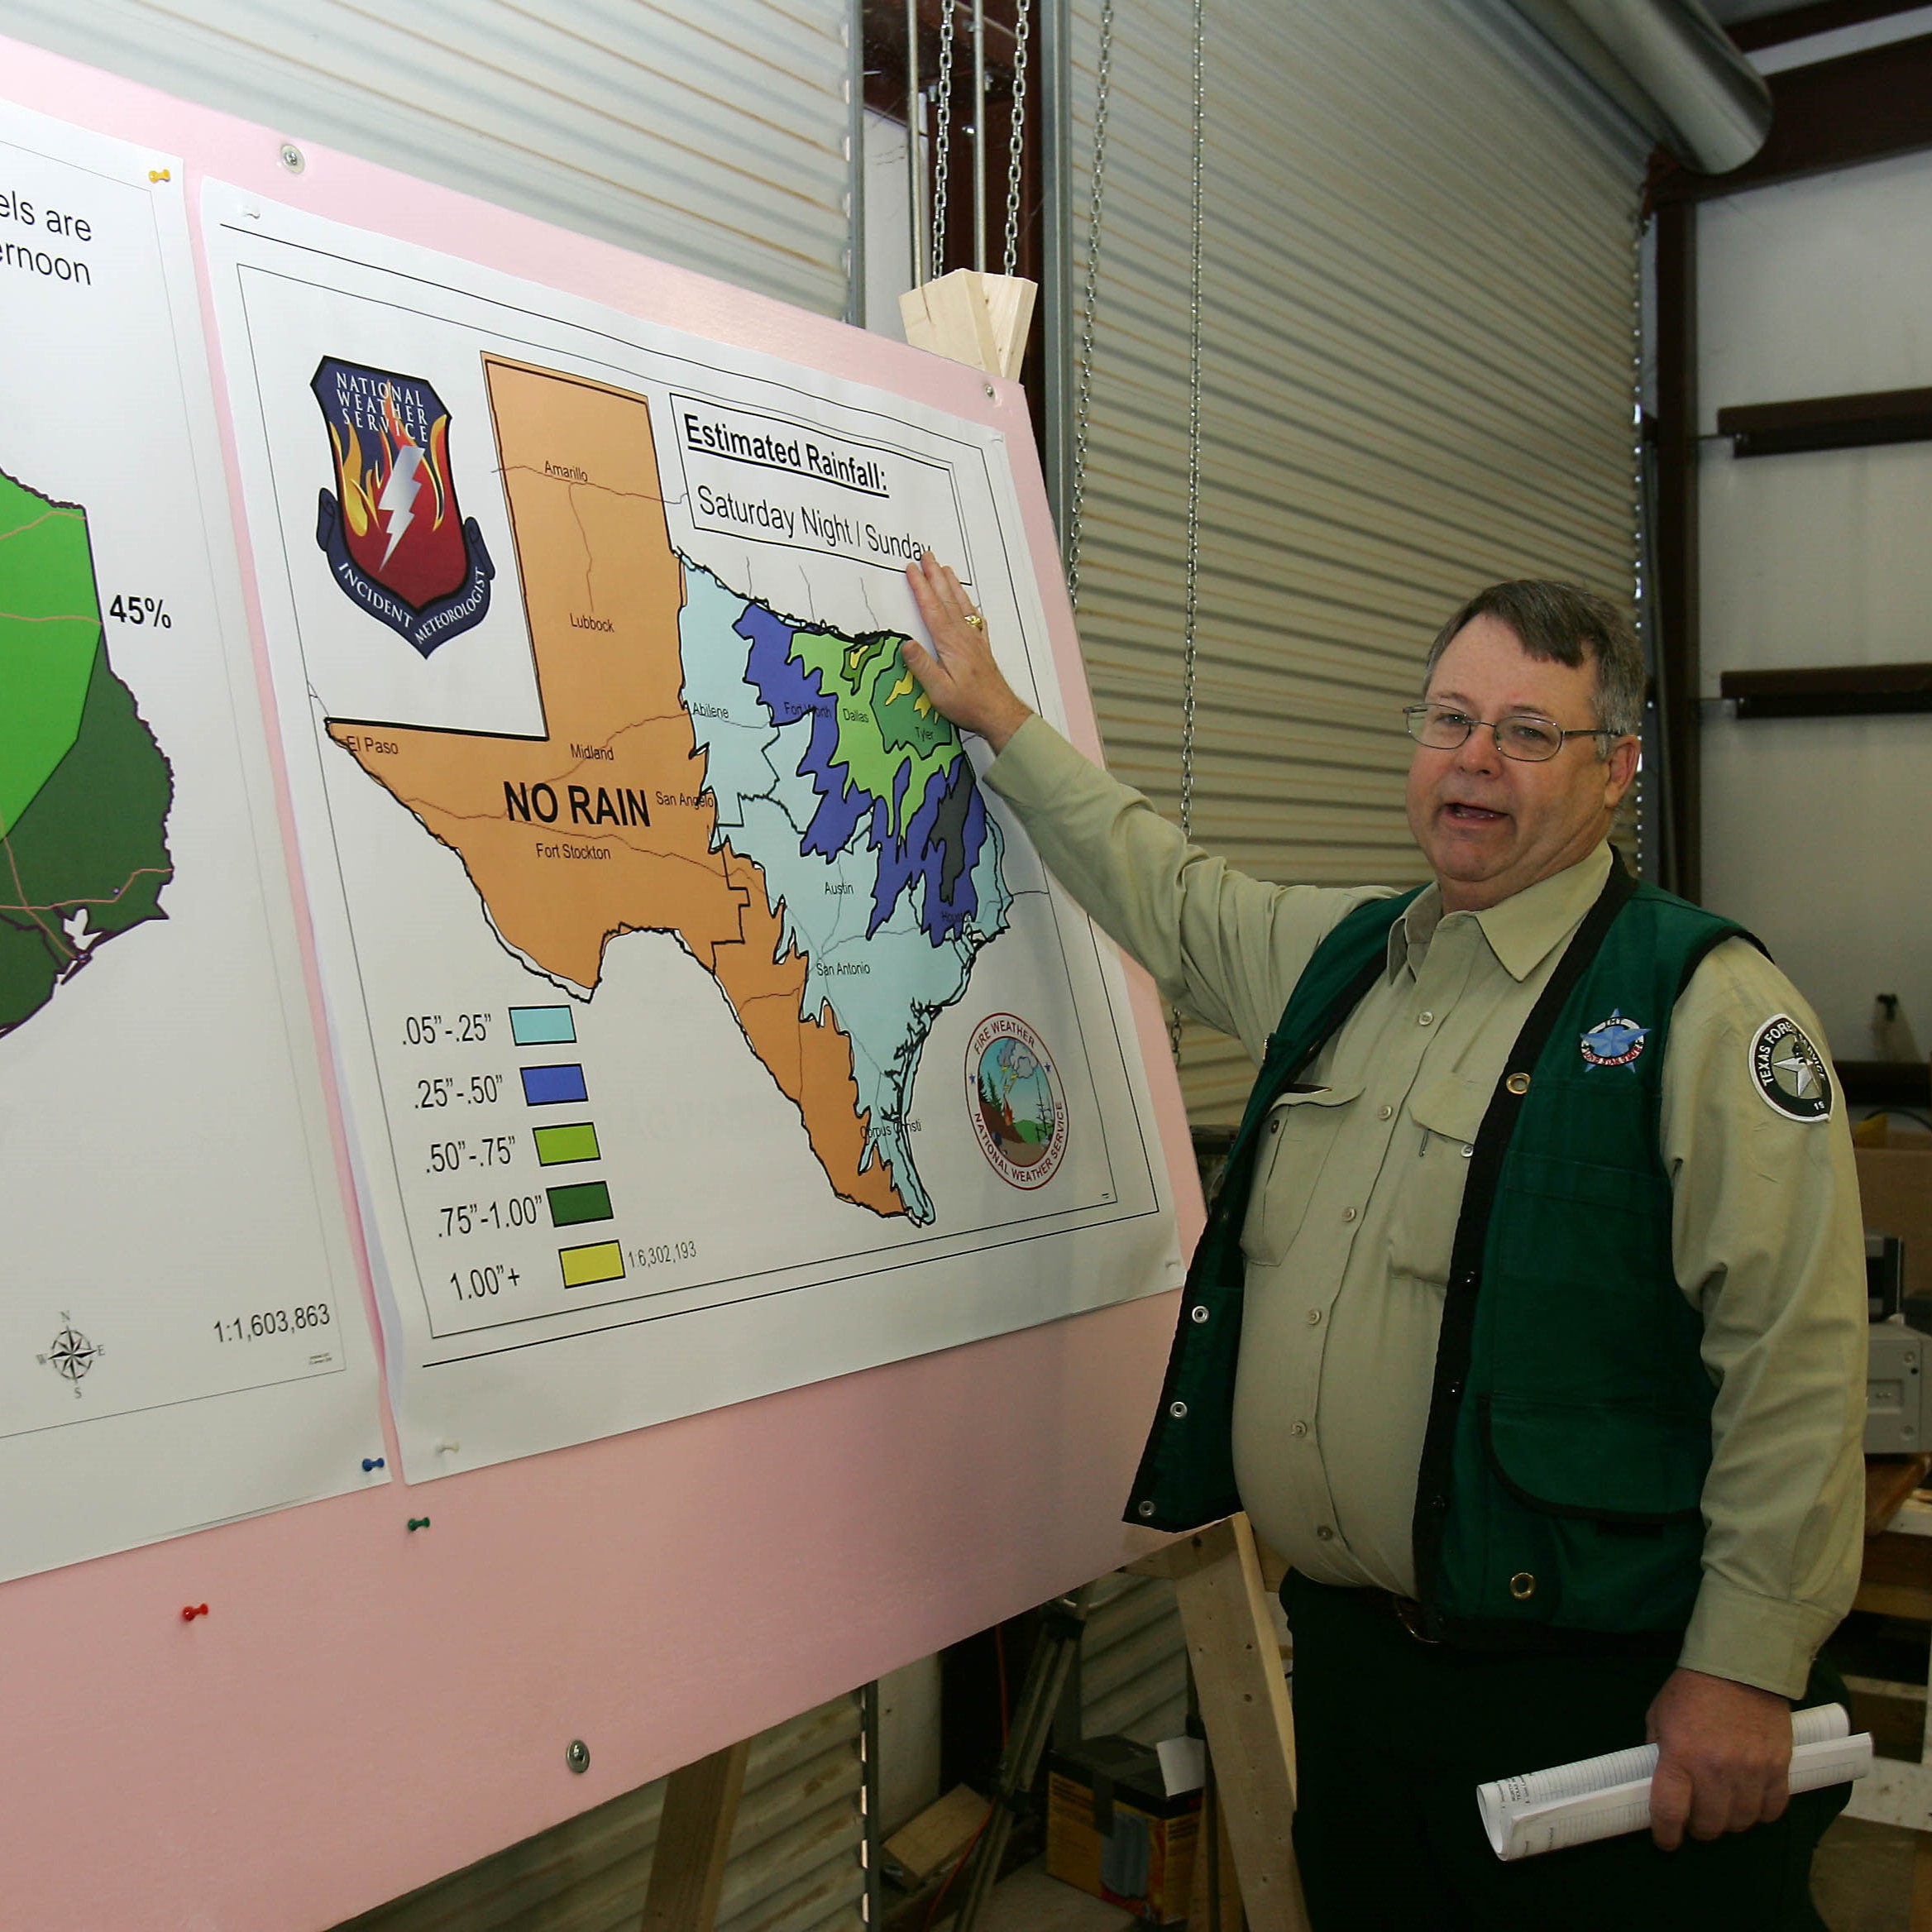 A Texas A&M Forest Service employee was honored with the Current Achievement Award for Fire Protection during today’s National Association of State Foresters Annual Meeting in Baton Rouge, Louisiana.